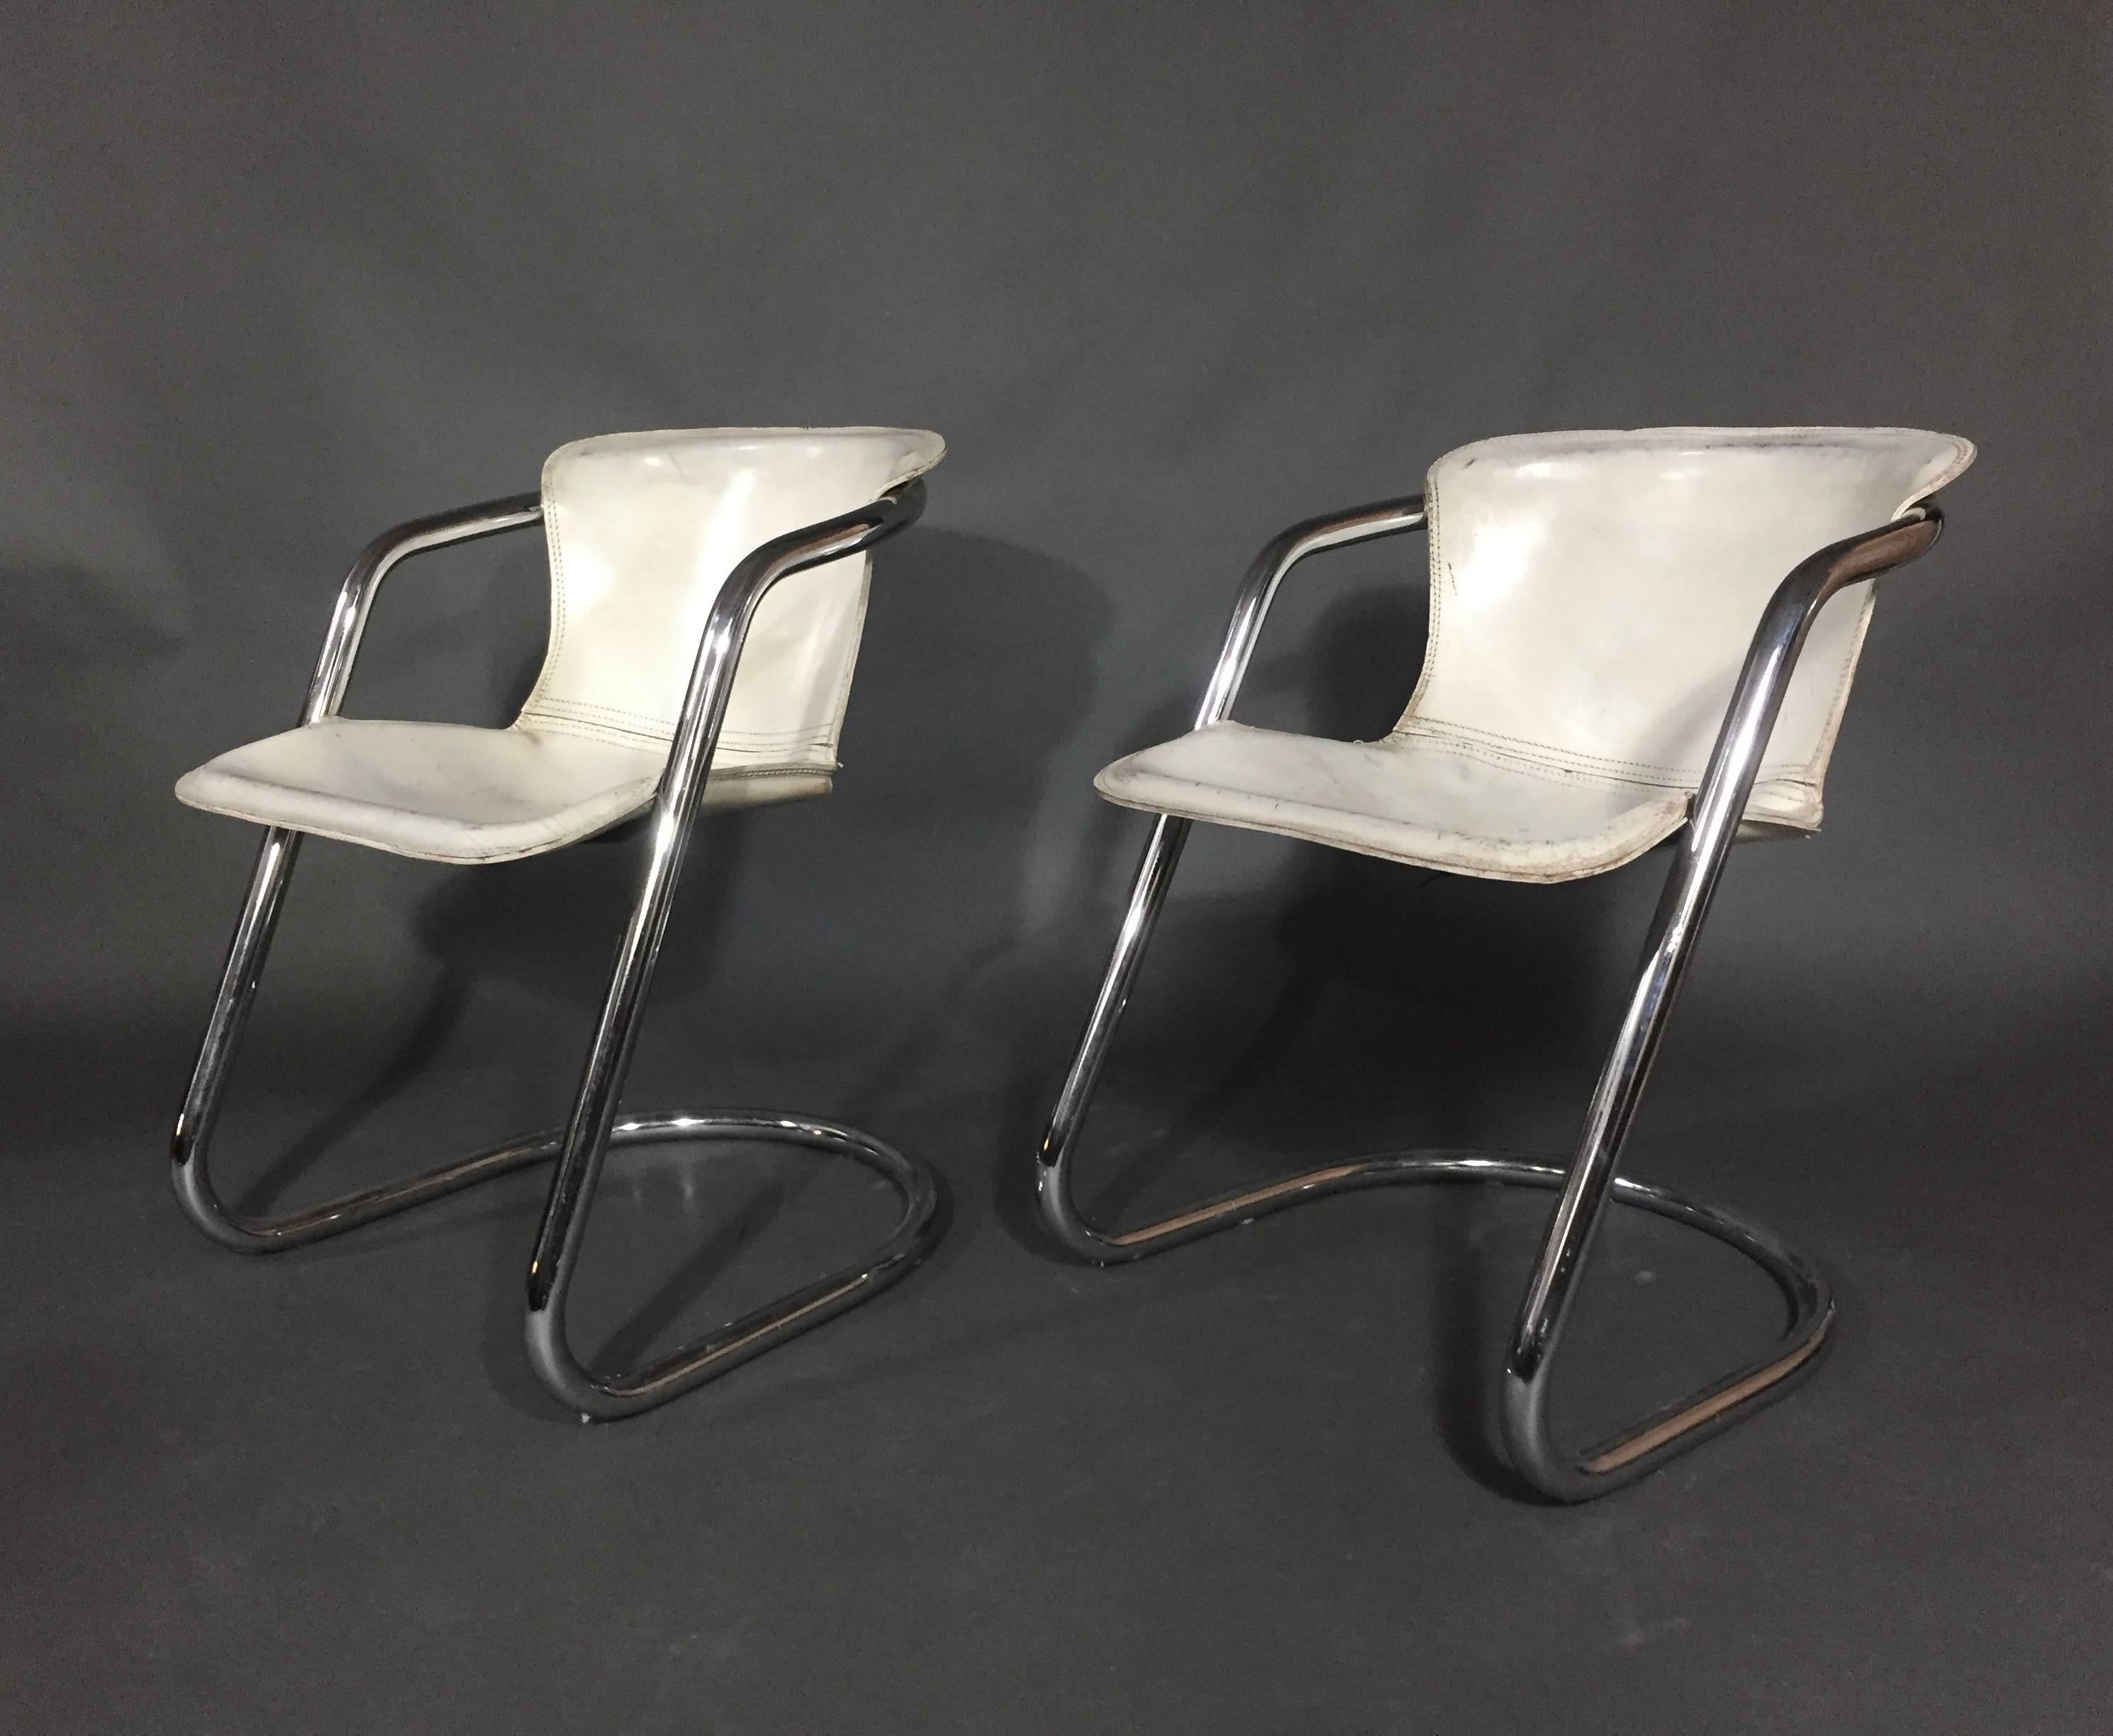 The very productive designer, Willy Rizzo, created this cantilevered armchair for best-in-class manufacturer Italian Cidue in the, mid-1970s. This set of four in white saddle leather has just the right amount of aged-patina overall and classic